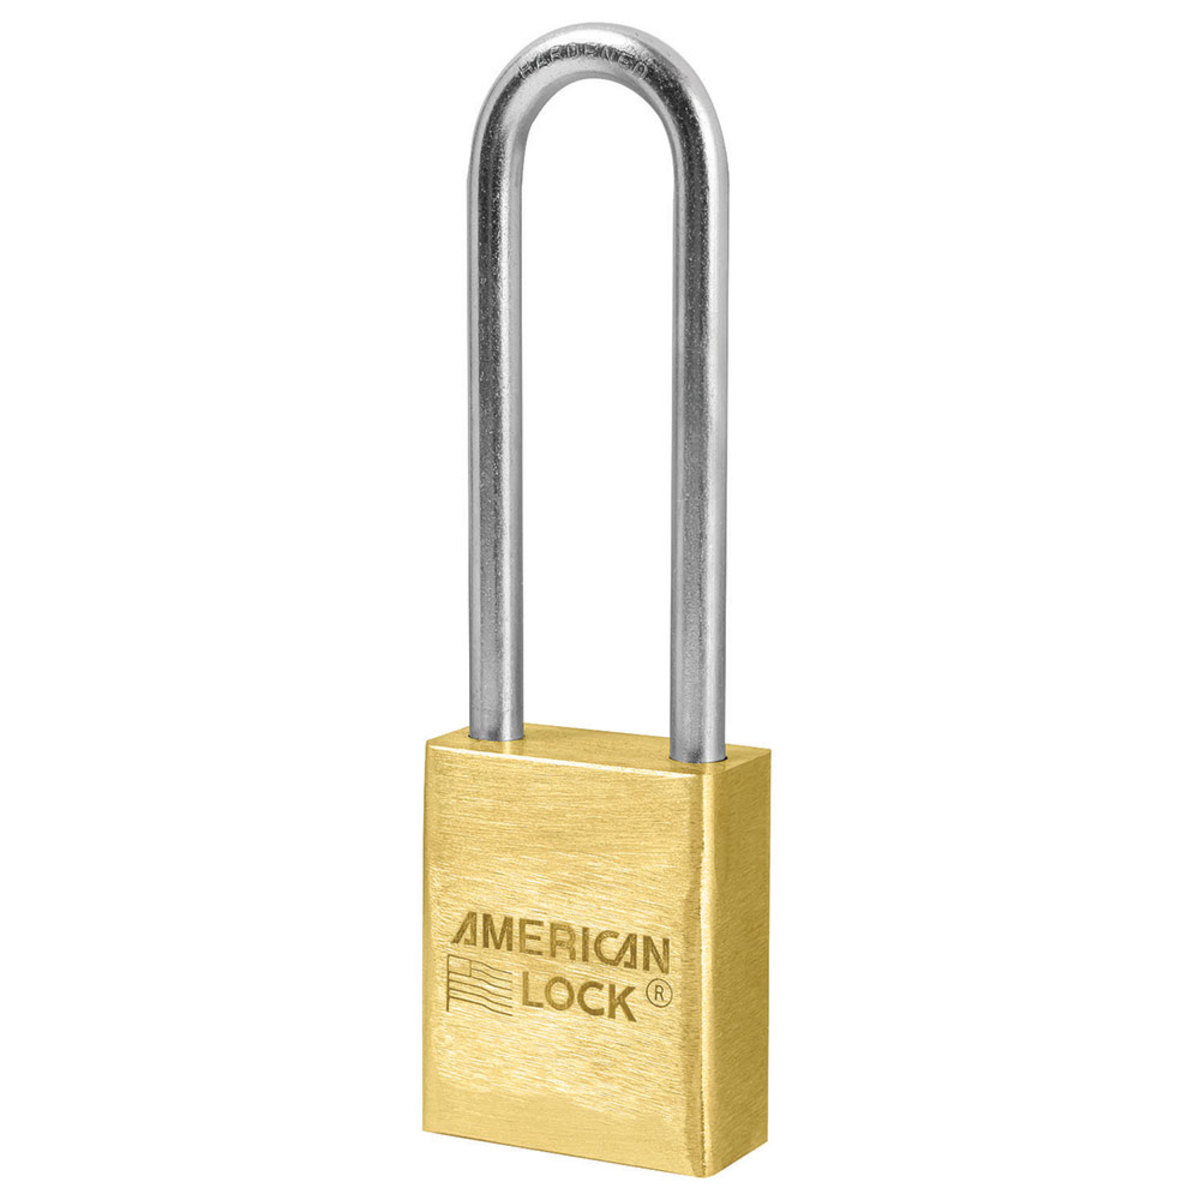 American Lock® Brass Solid Brass General Security Padlock Boron Alloy Shackle